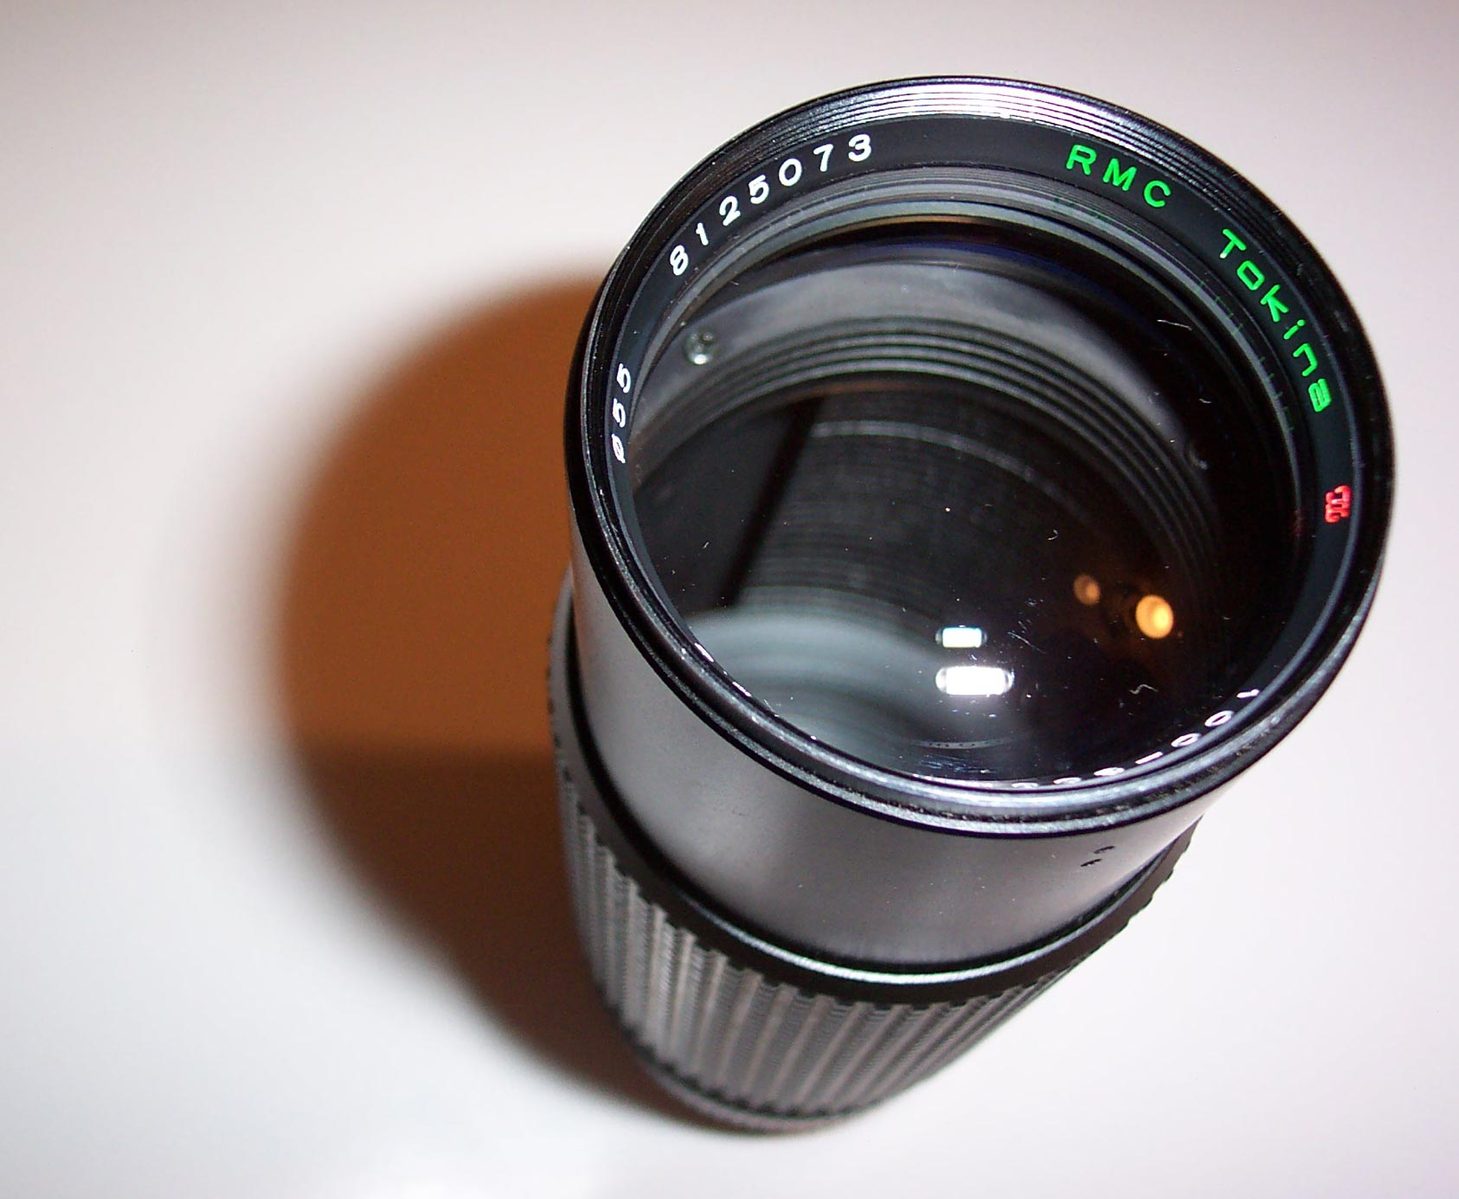 a camera lens is shown with an empty cup nearby